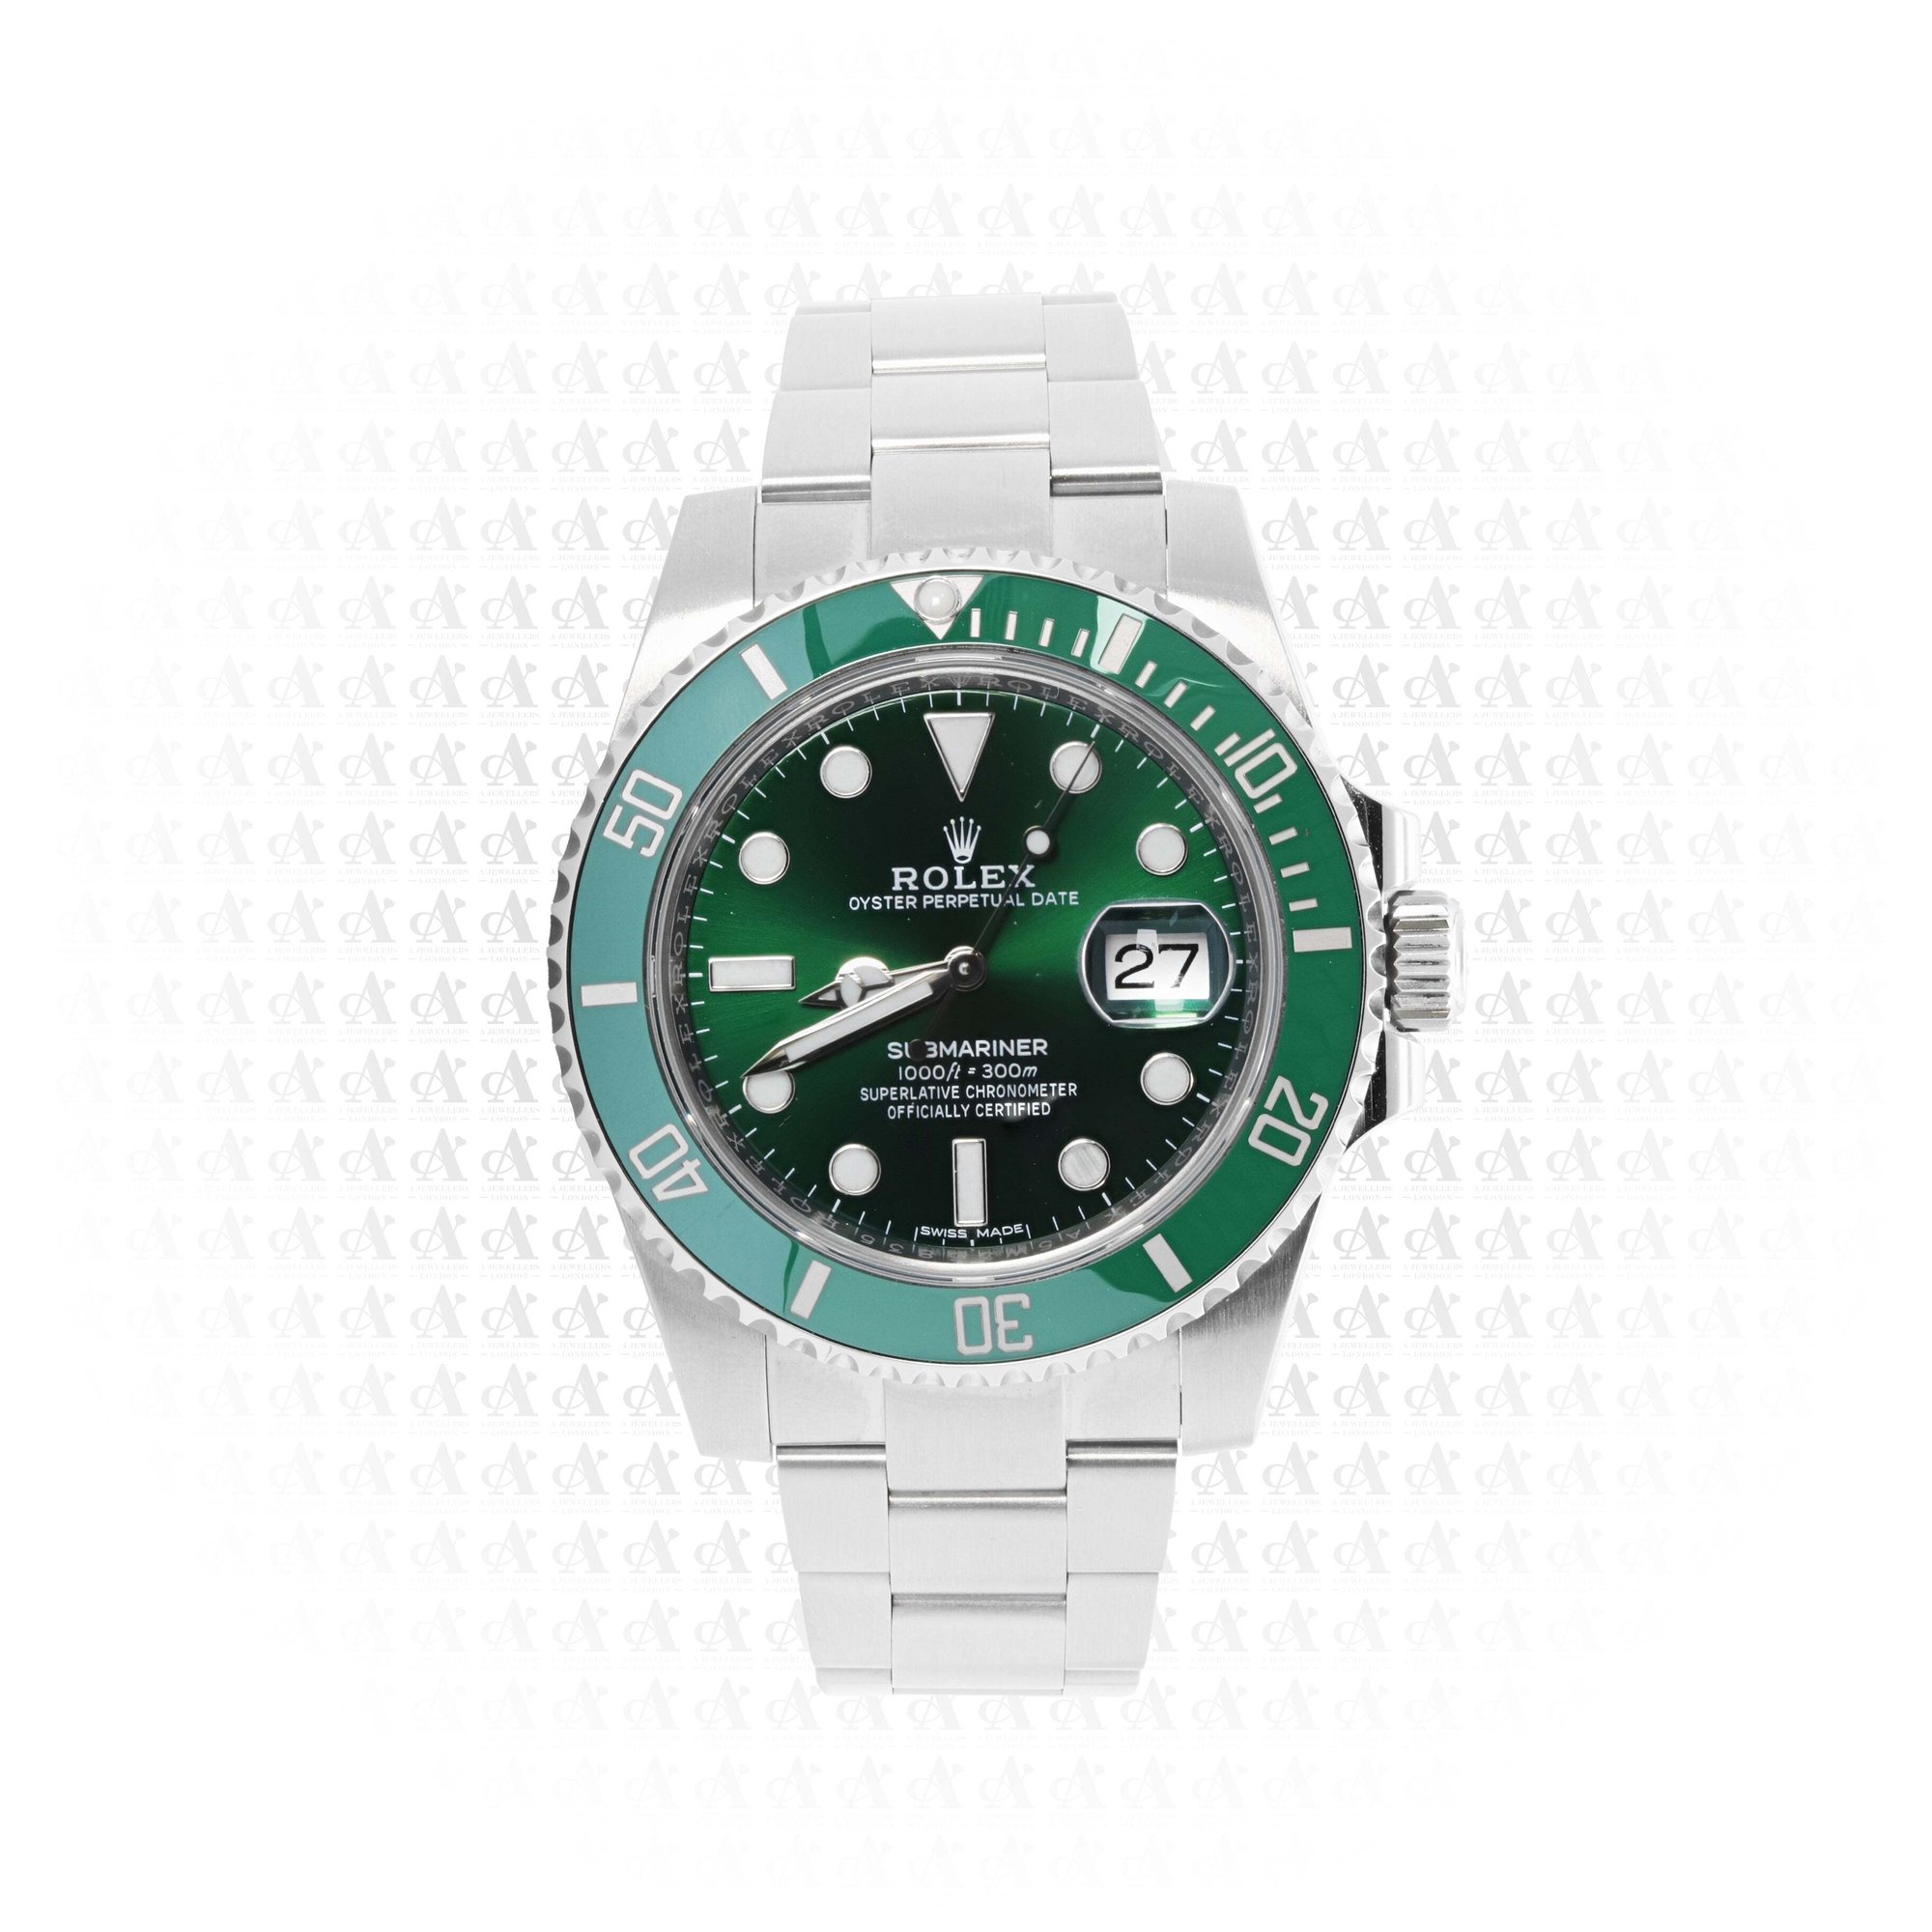 ROLEX  SUBMARINER HULK, REFERENCE 116610LV, A STAINLESS STEEL